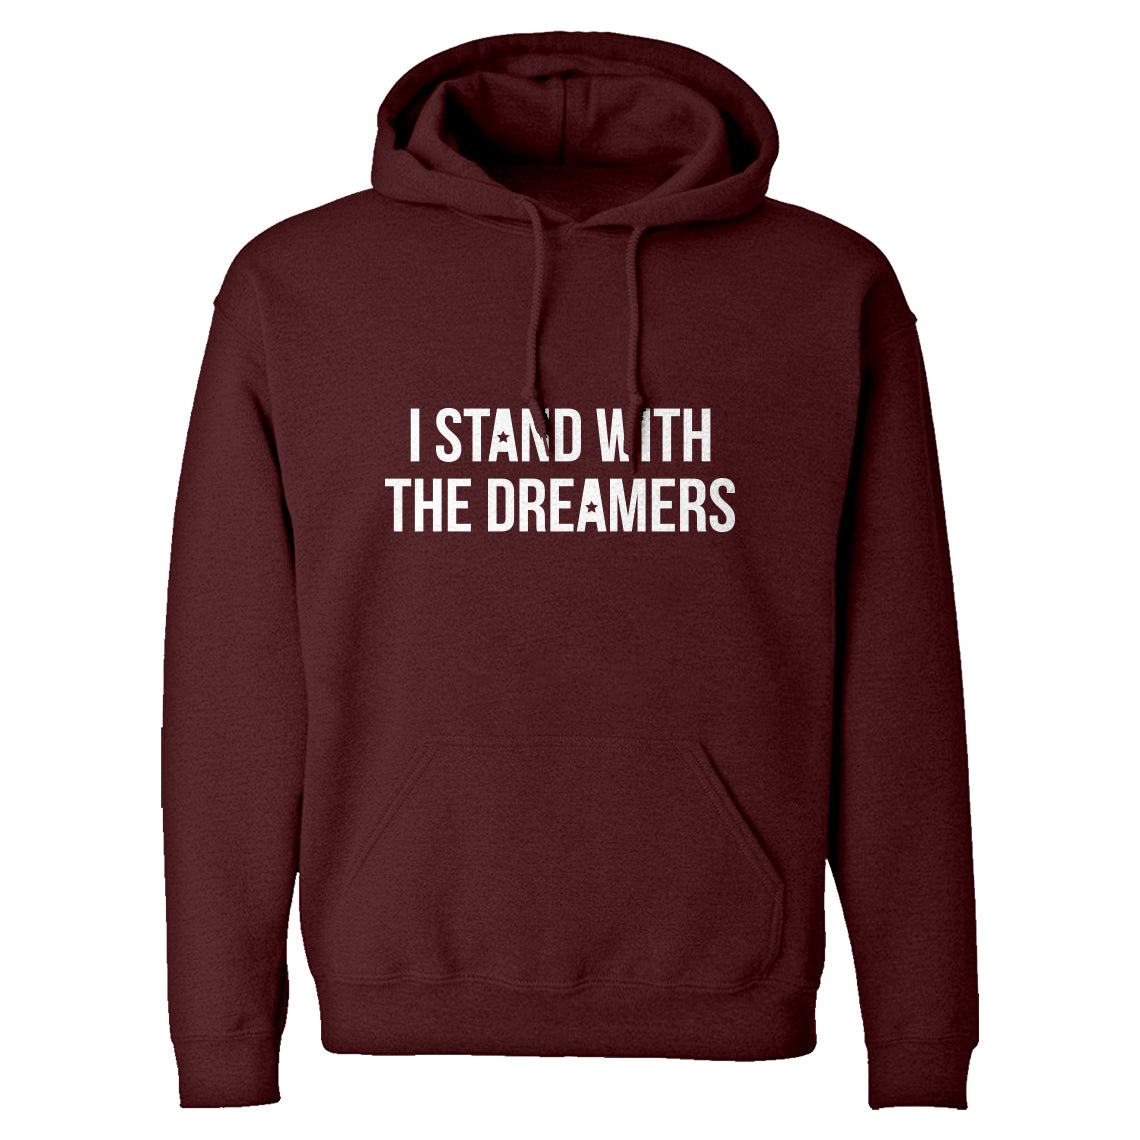 Hoodie Stand With the Dreamers Unisex Adult Hoodie – Indica Plateau